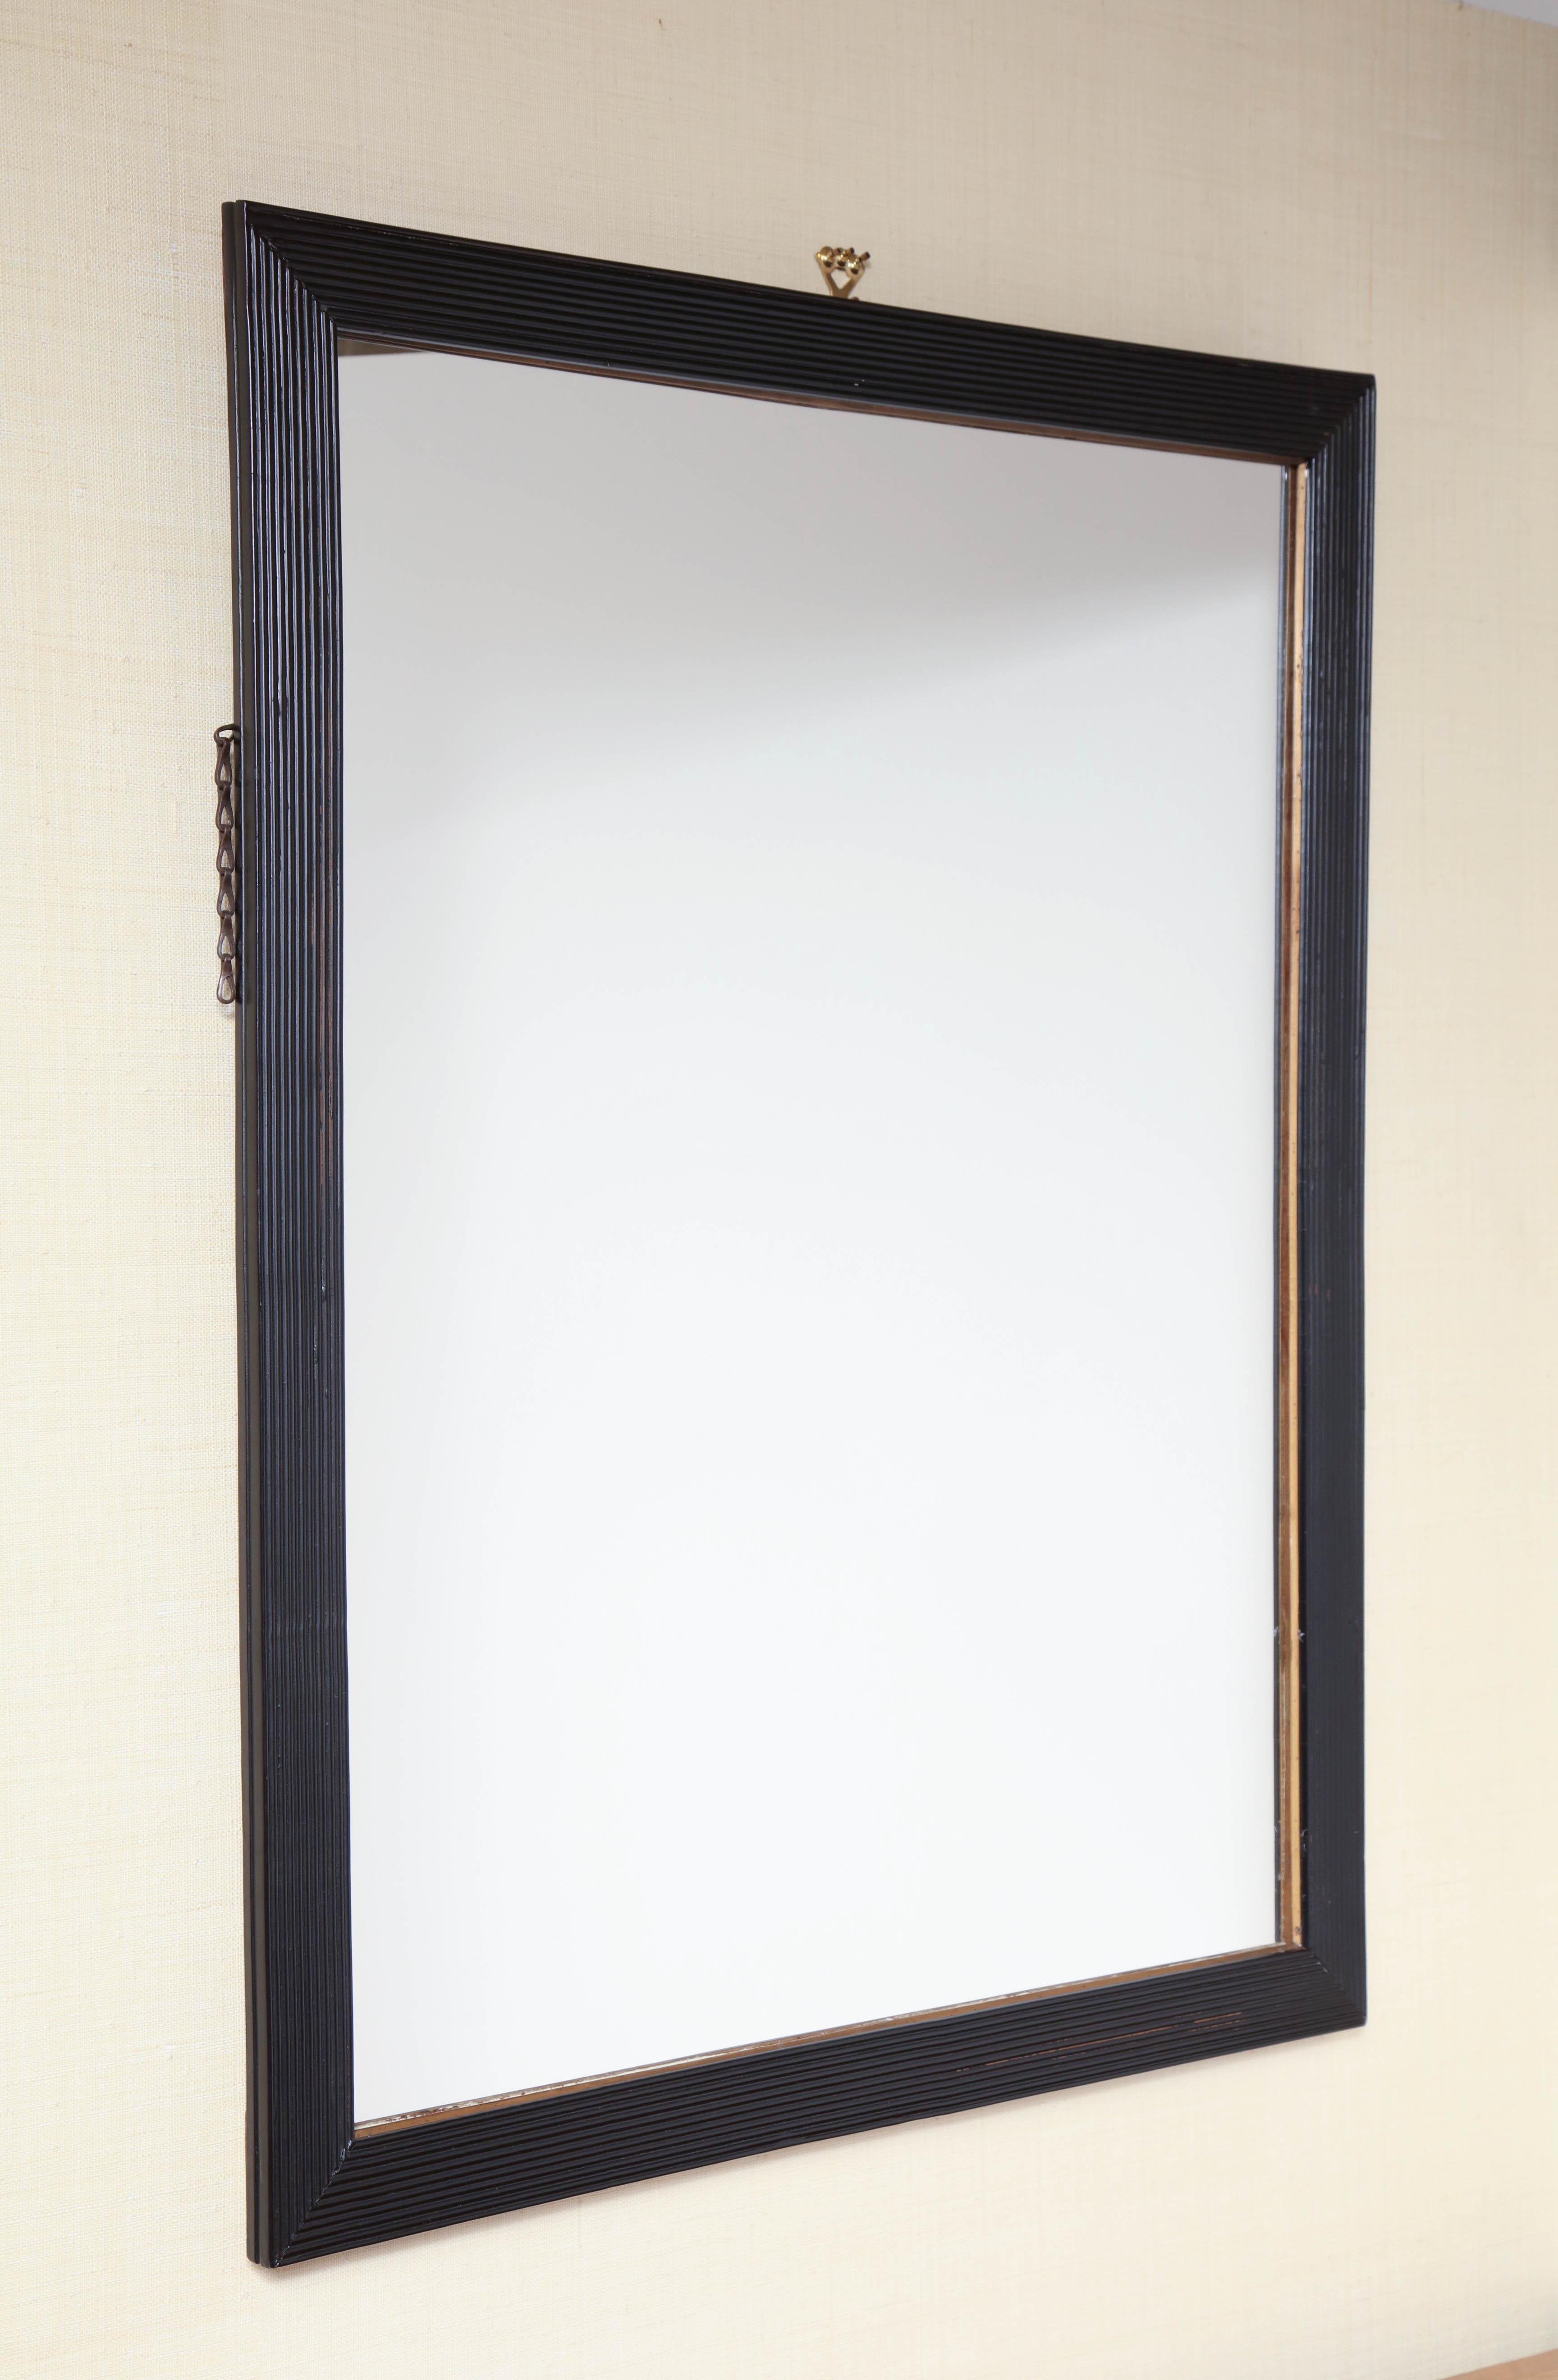 Mid-19th century English, ribbed frame black lacquer mirror.